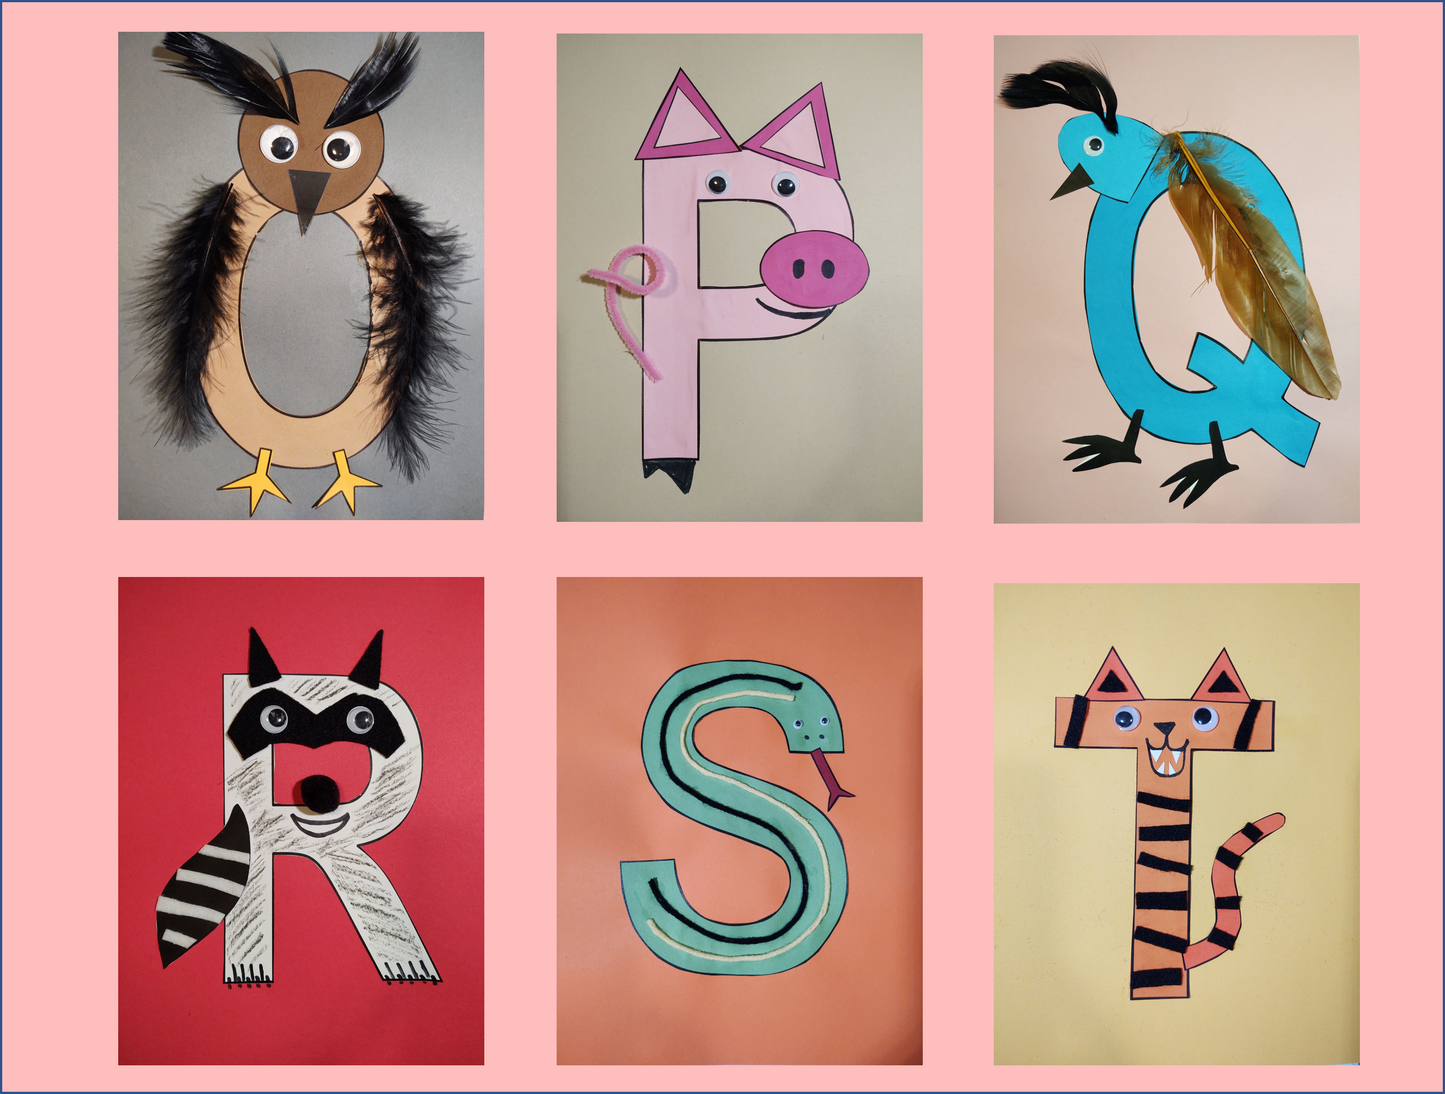 Select an Alphabet Animal Letter Craft - Cut and Paste Phonics Activity